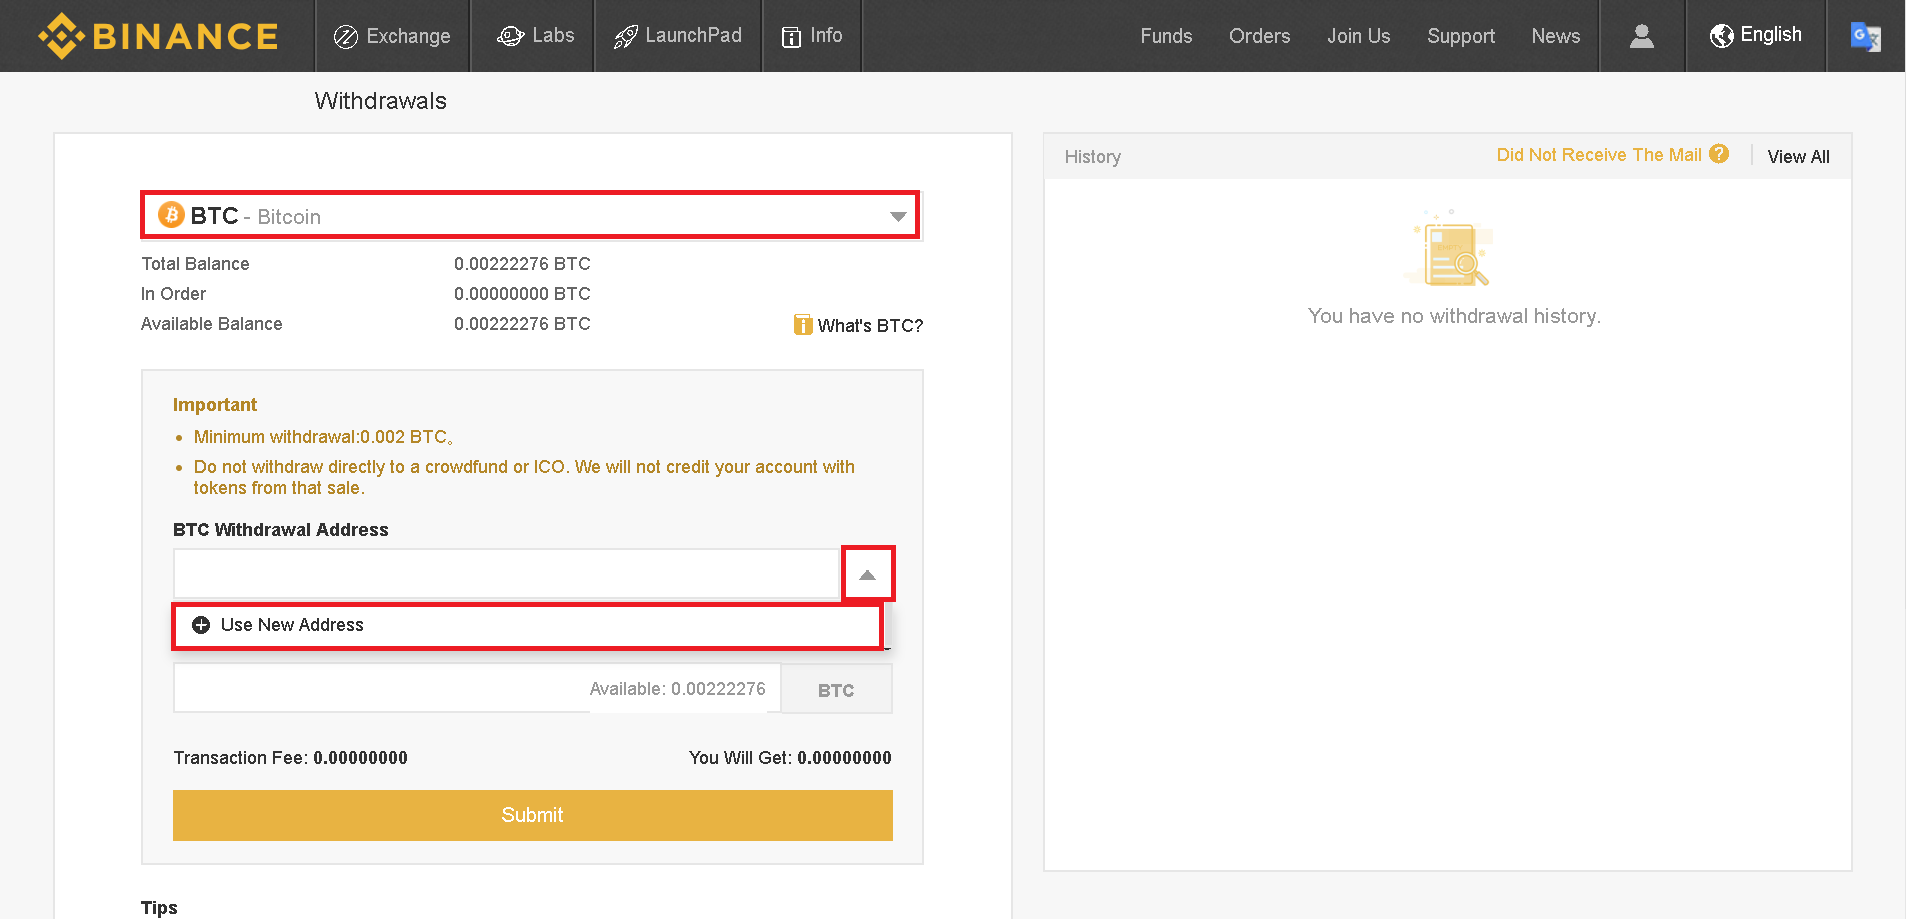 How To Get My Bitcoin Wallet Address - Earn Bitcoin Data Entry